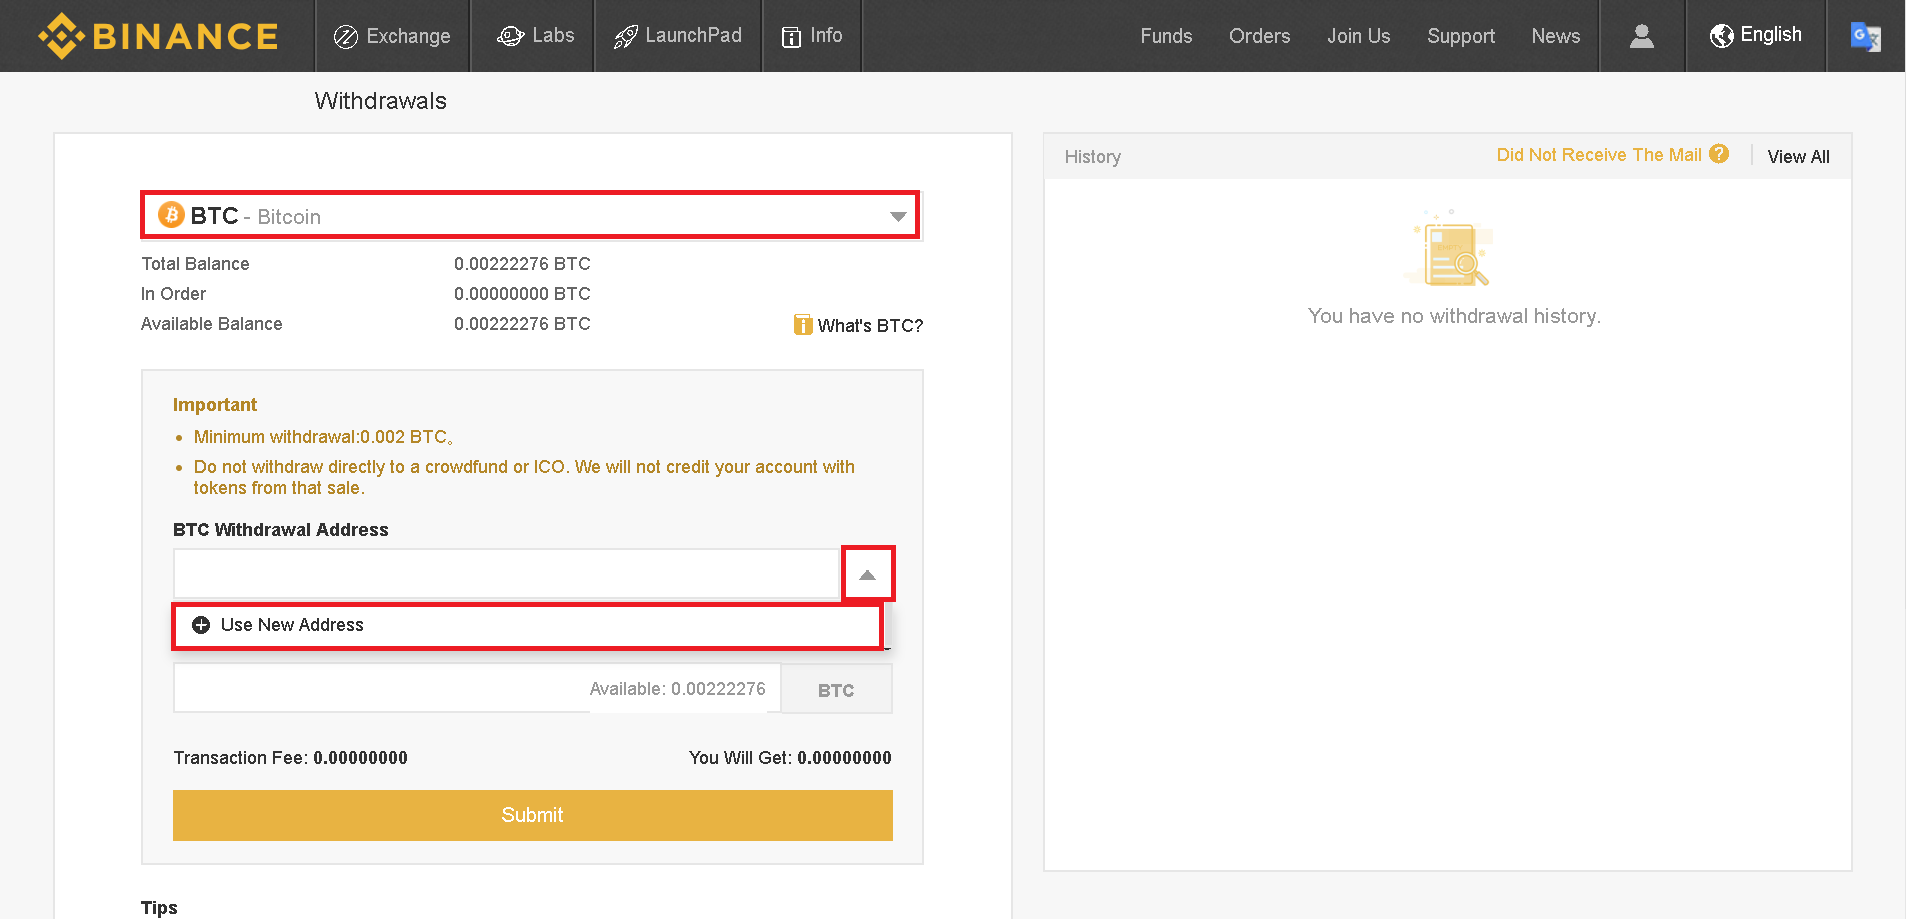 How To Get My Bitcoin Wallet Address - Earn Bitcoin Data Entry